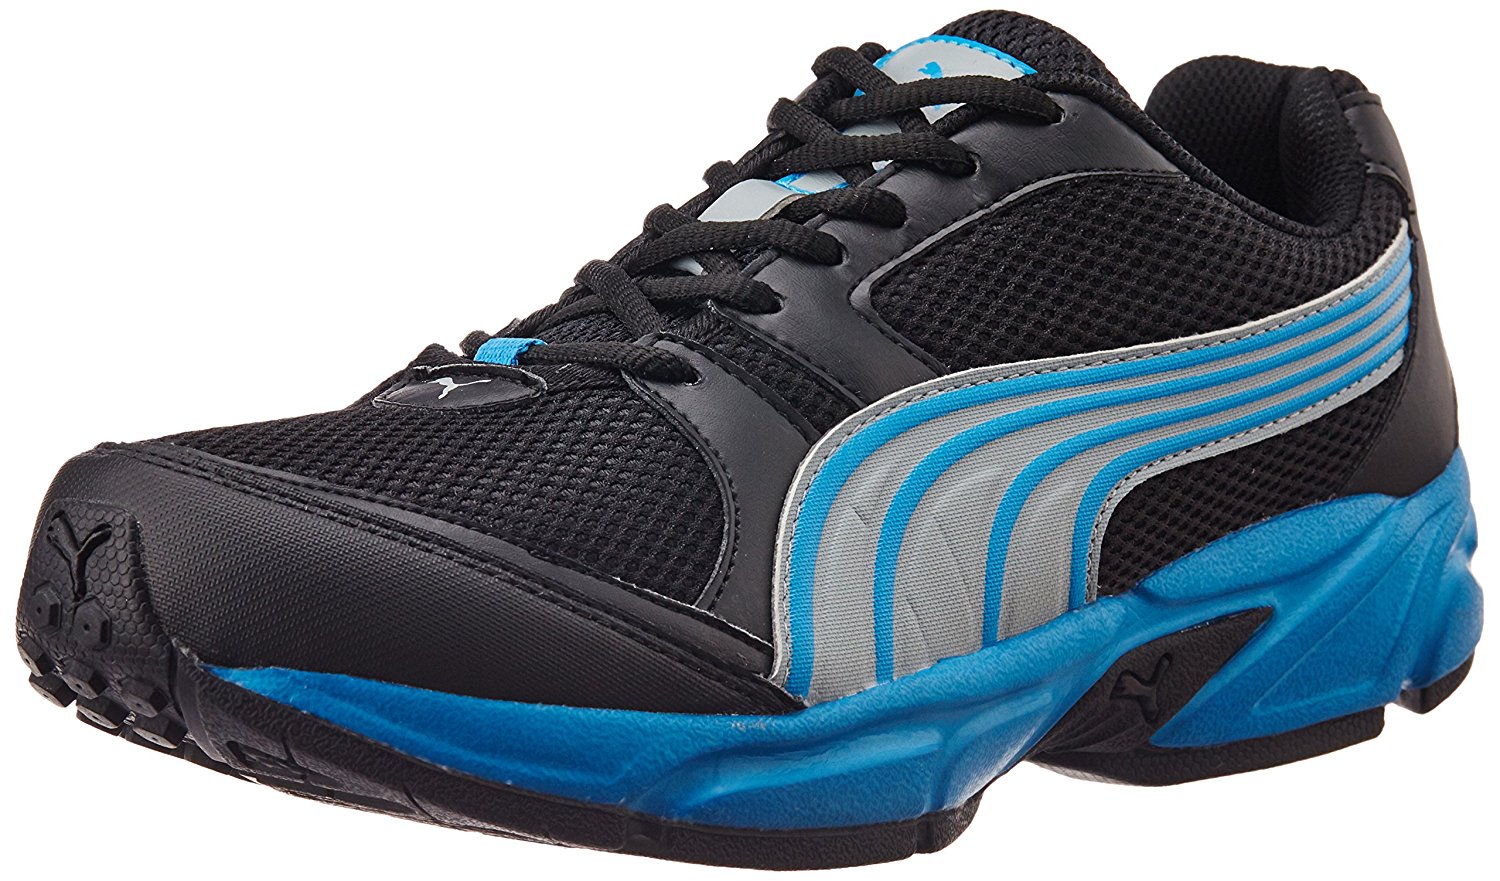 Buy Puma Mens Black Blue Running Shoes Online @ ₹2699 from ShopClues